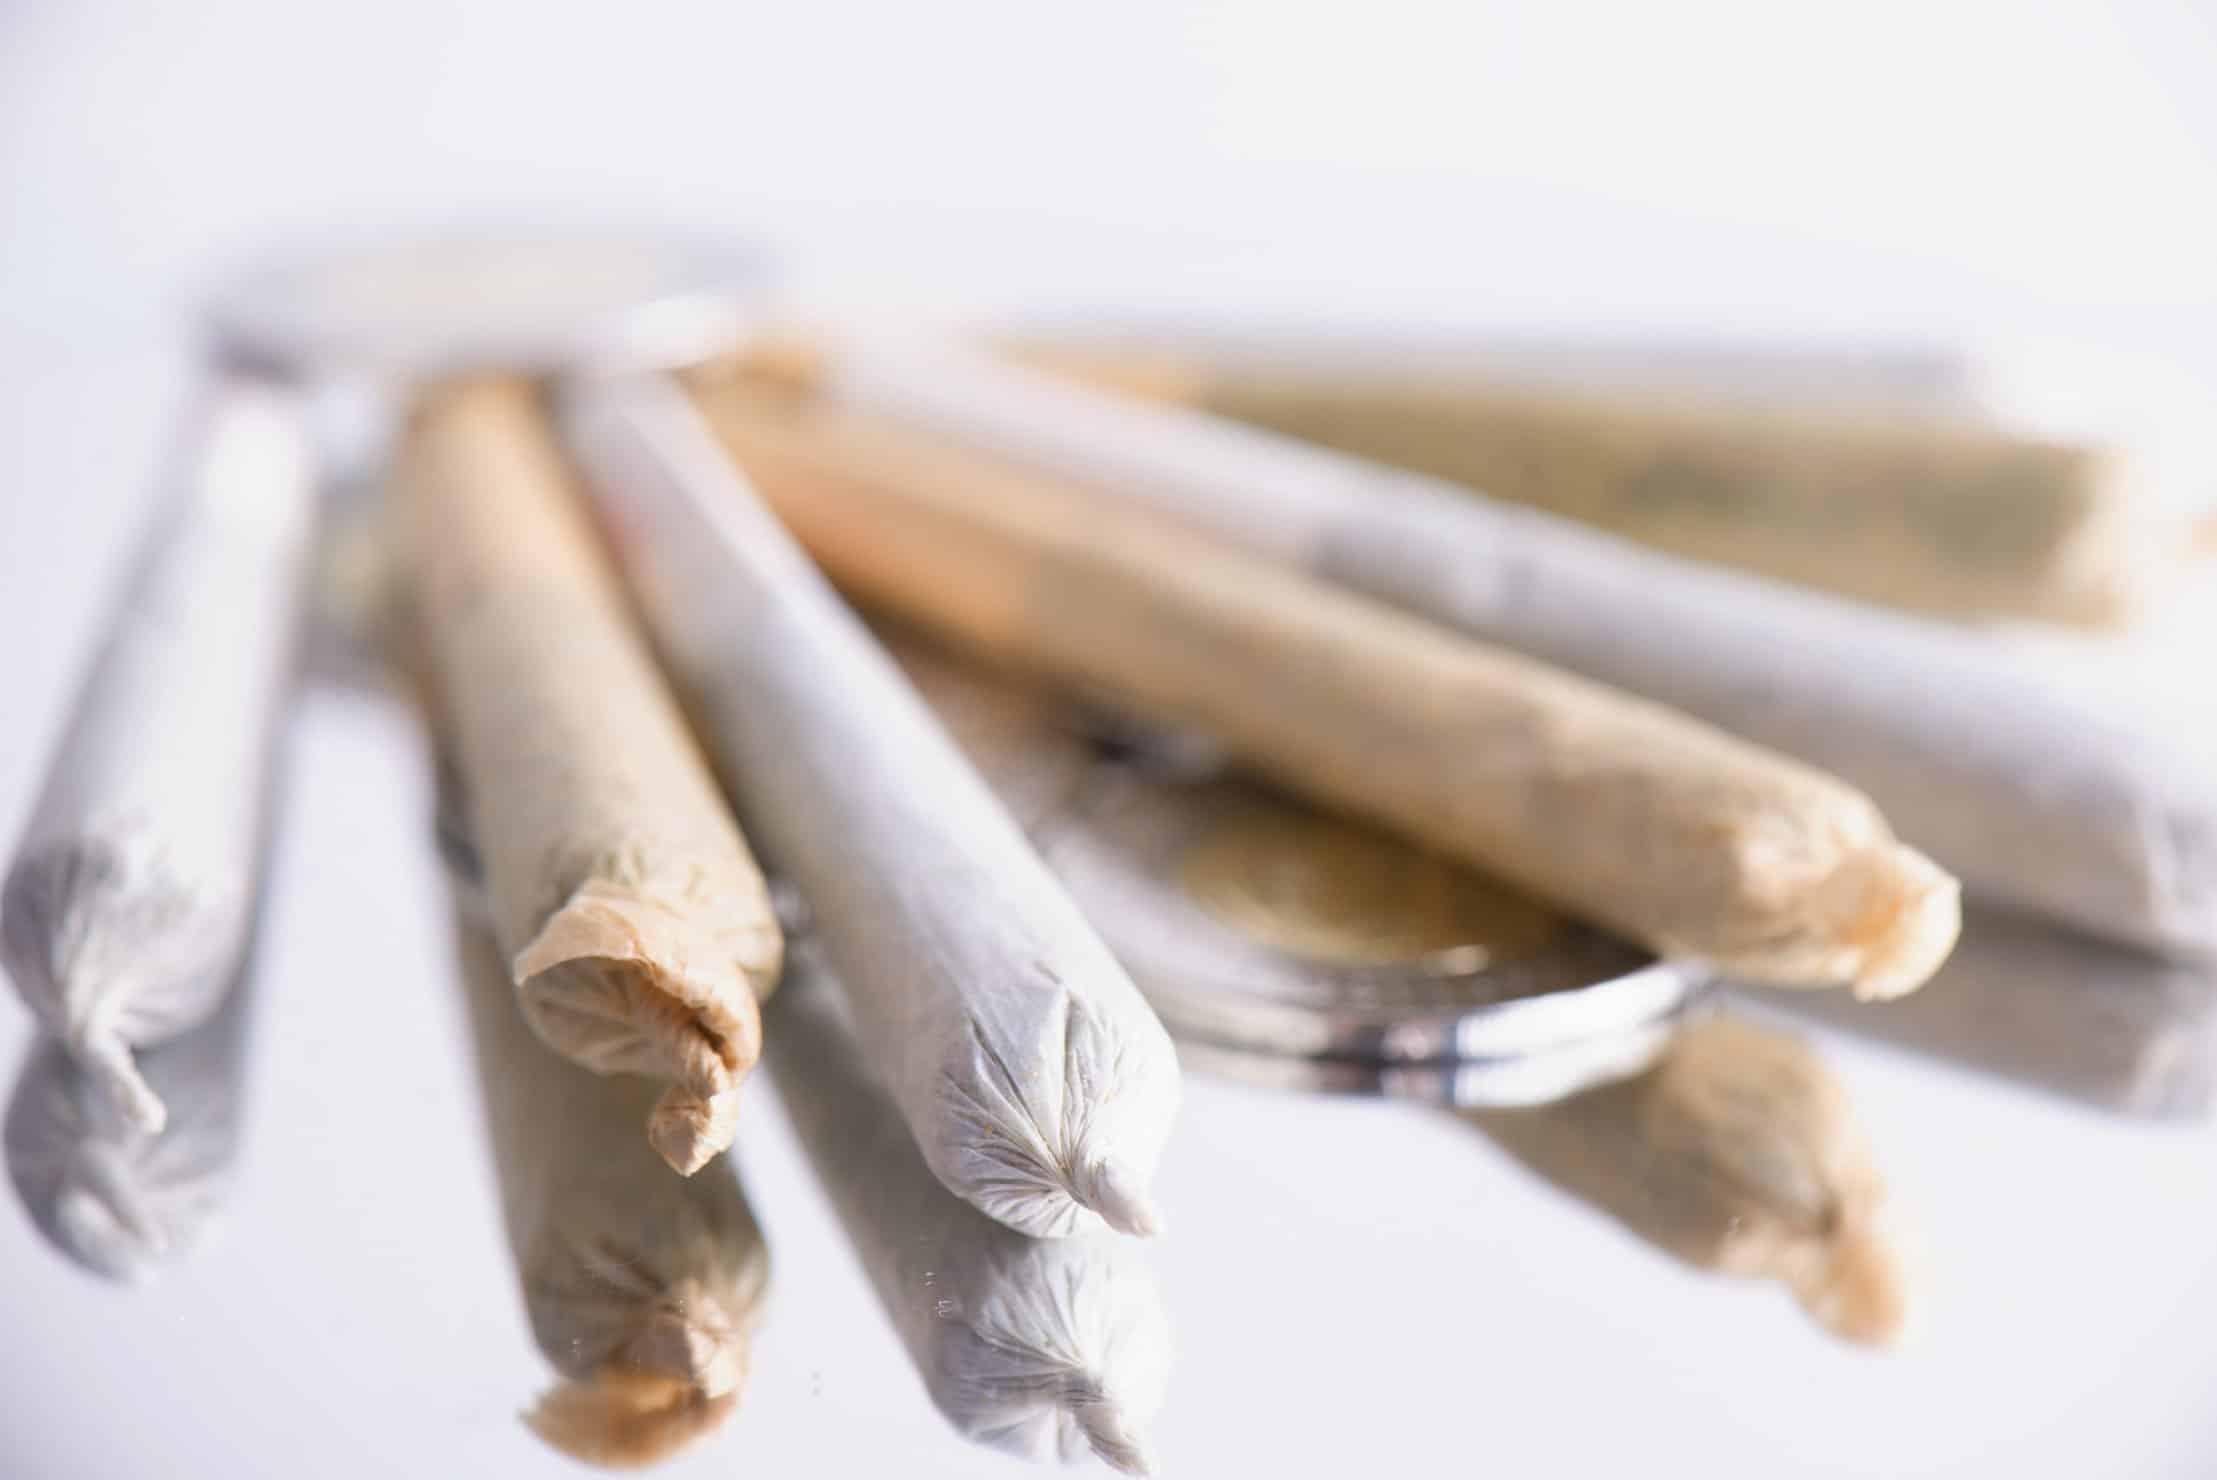 Joint, Spliff and Blunt: Different Ways Of Rolling Cannabis